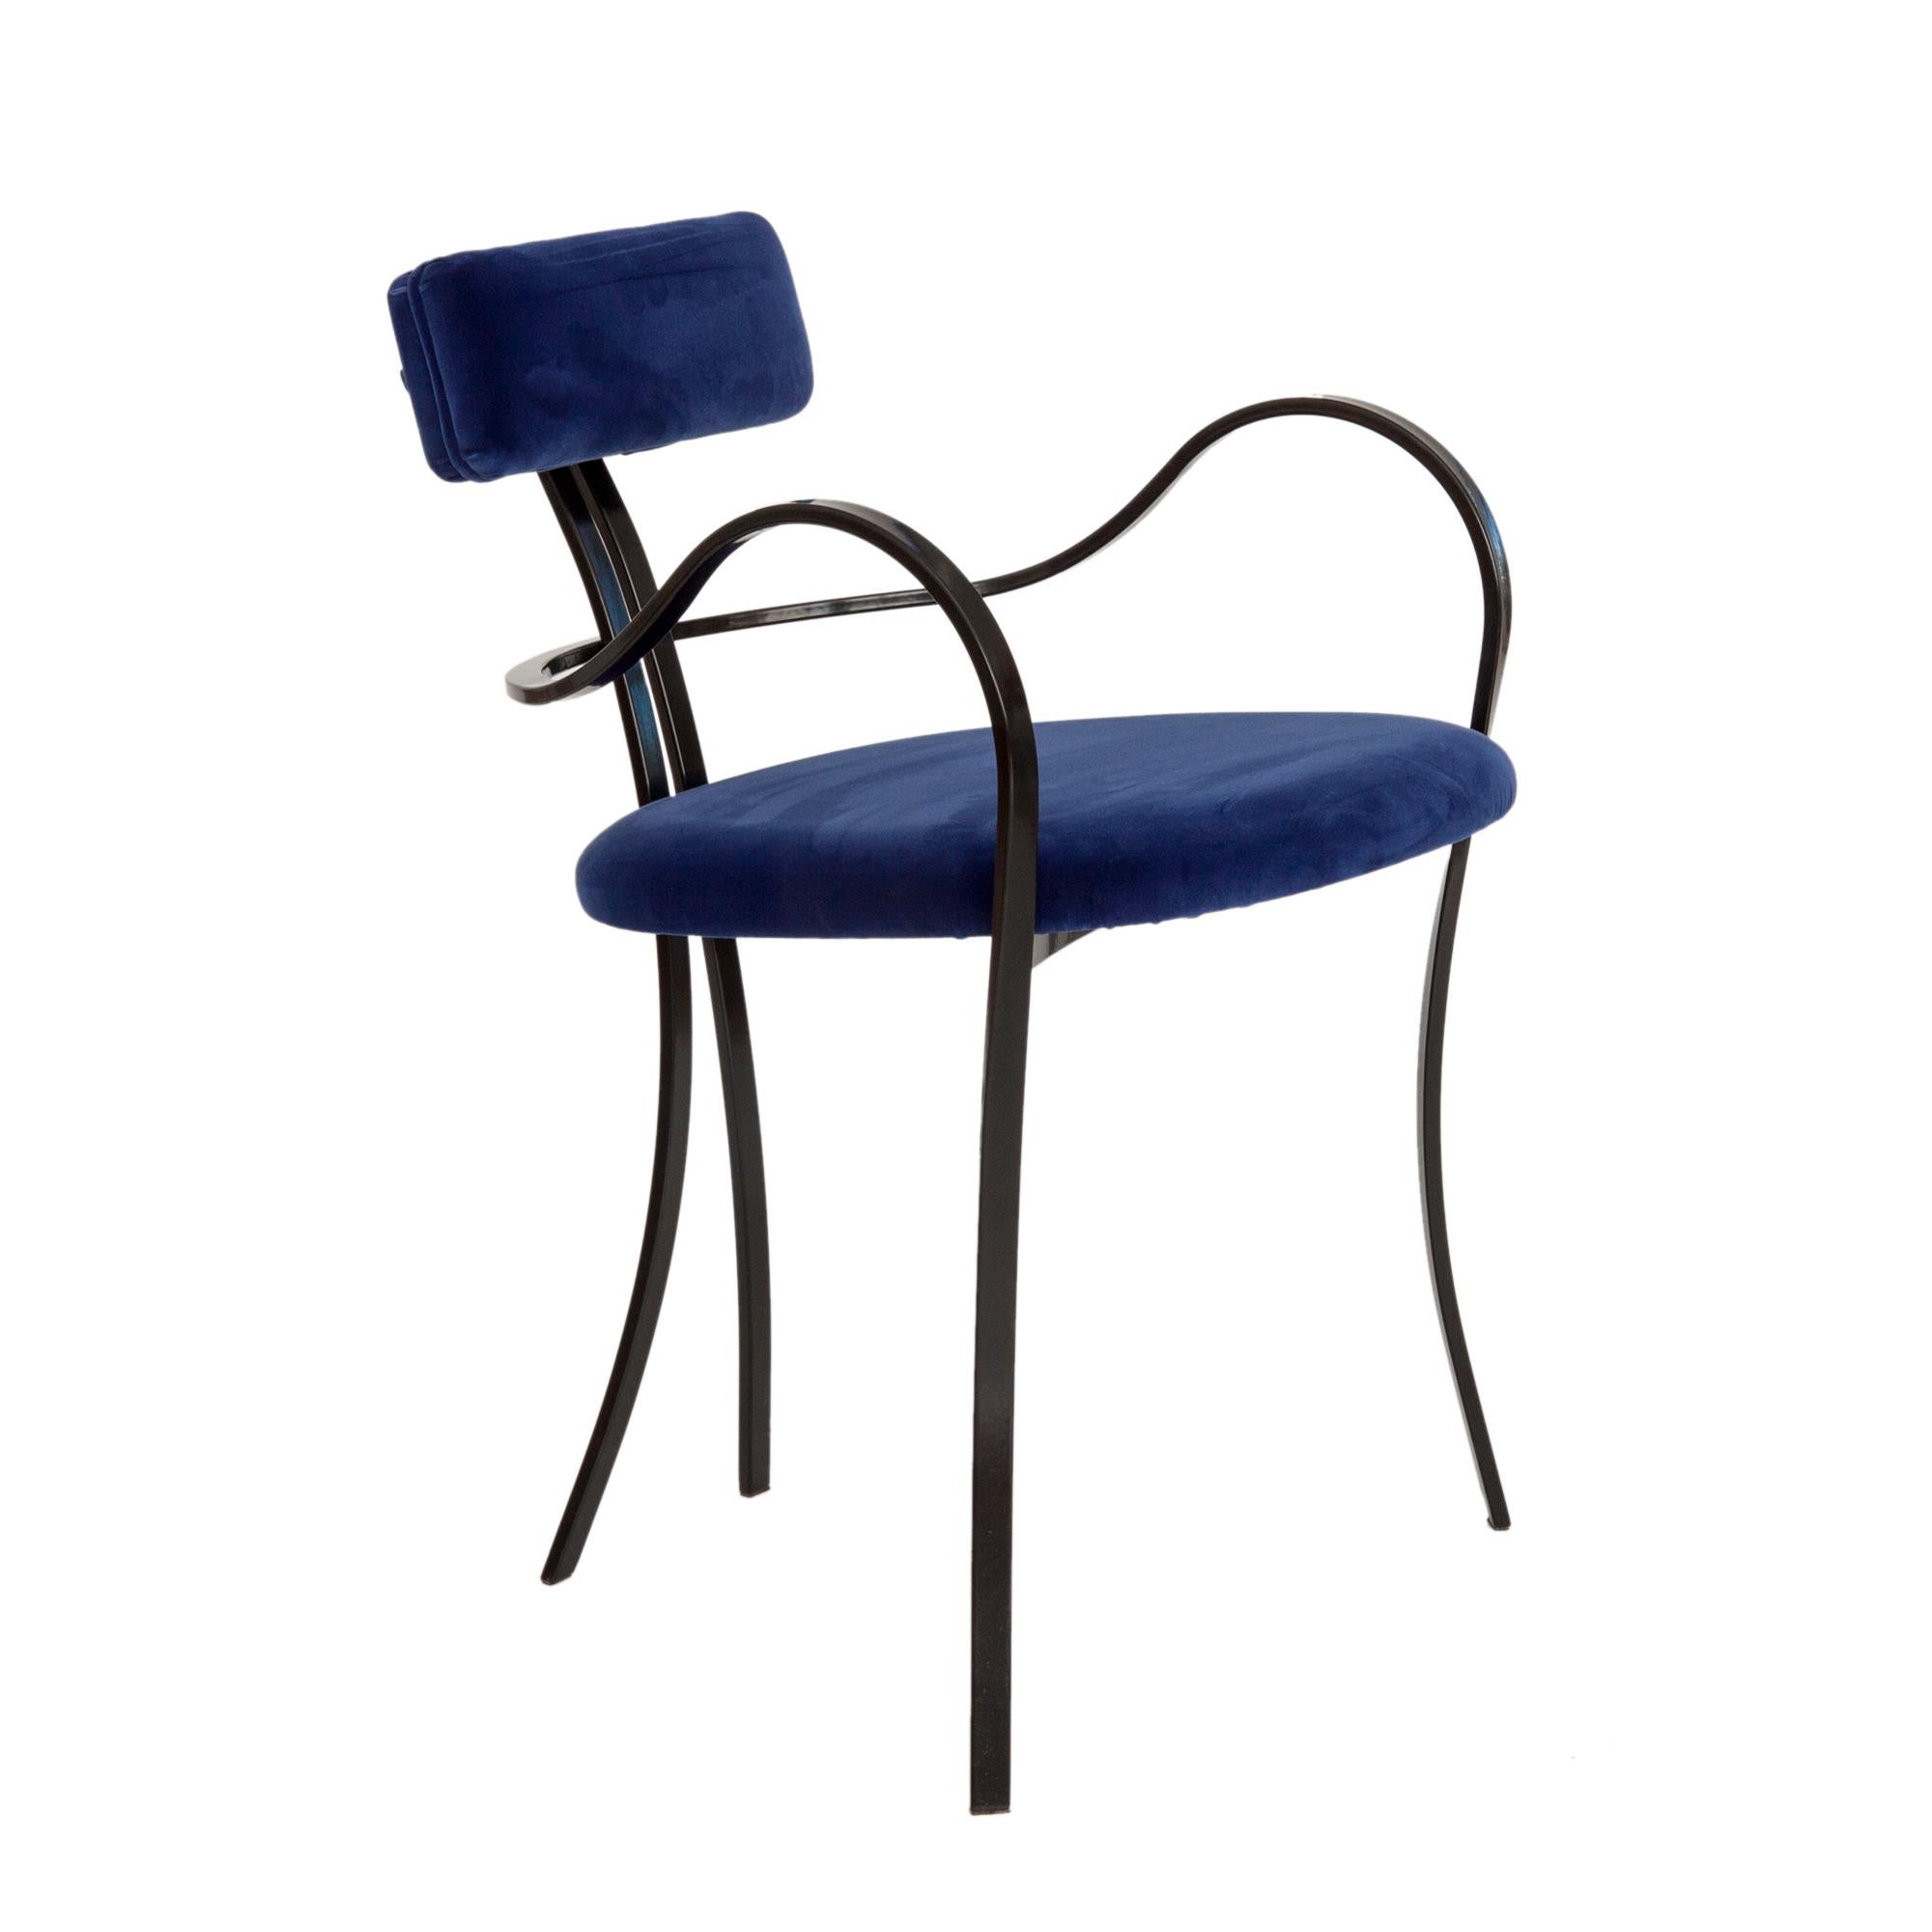 The 'Violet' chair features a Minimalist design and is well conceived in its essentiality. The frame is made of metal and the upholstery is in velvet. The metal frame is curvy both in the legs that support the seat and the armrests. The result, with